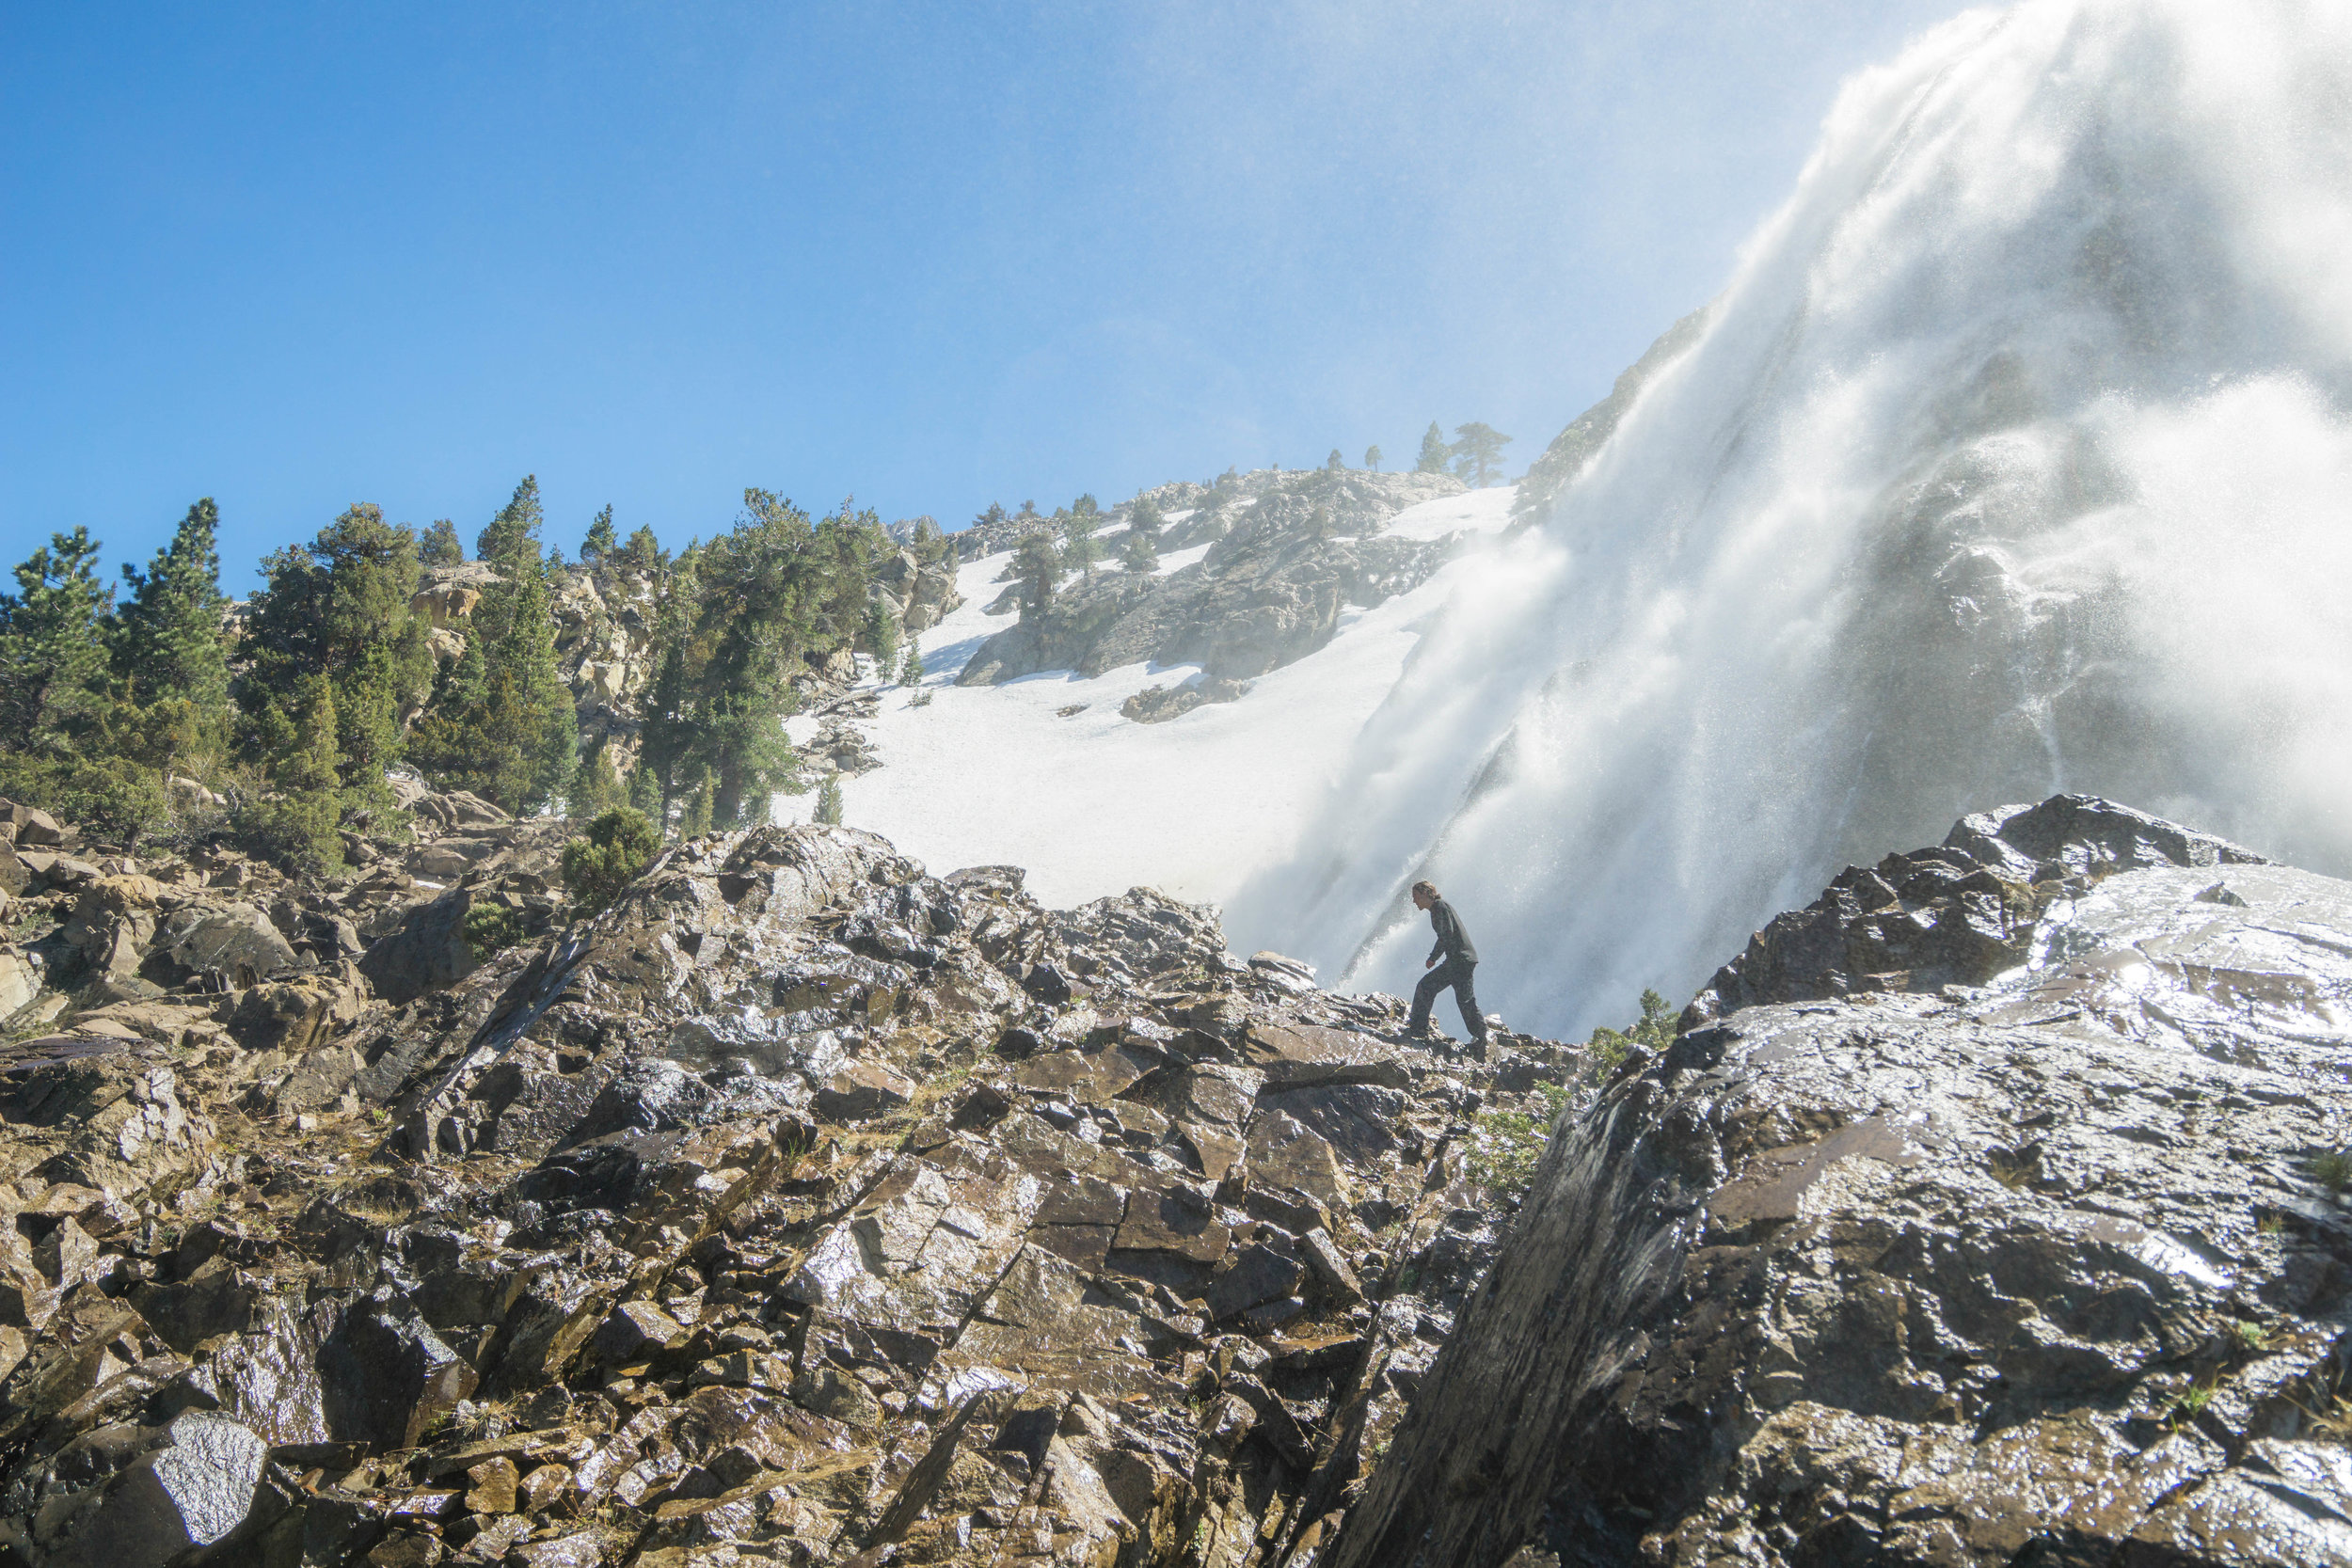 Getting blasted by the sun, the melting winter snowpack fed the fall's torrent rush with an abnormally large amount of water.